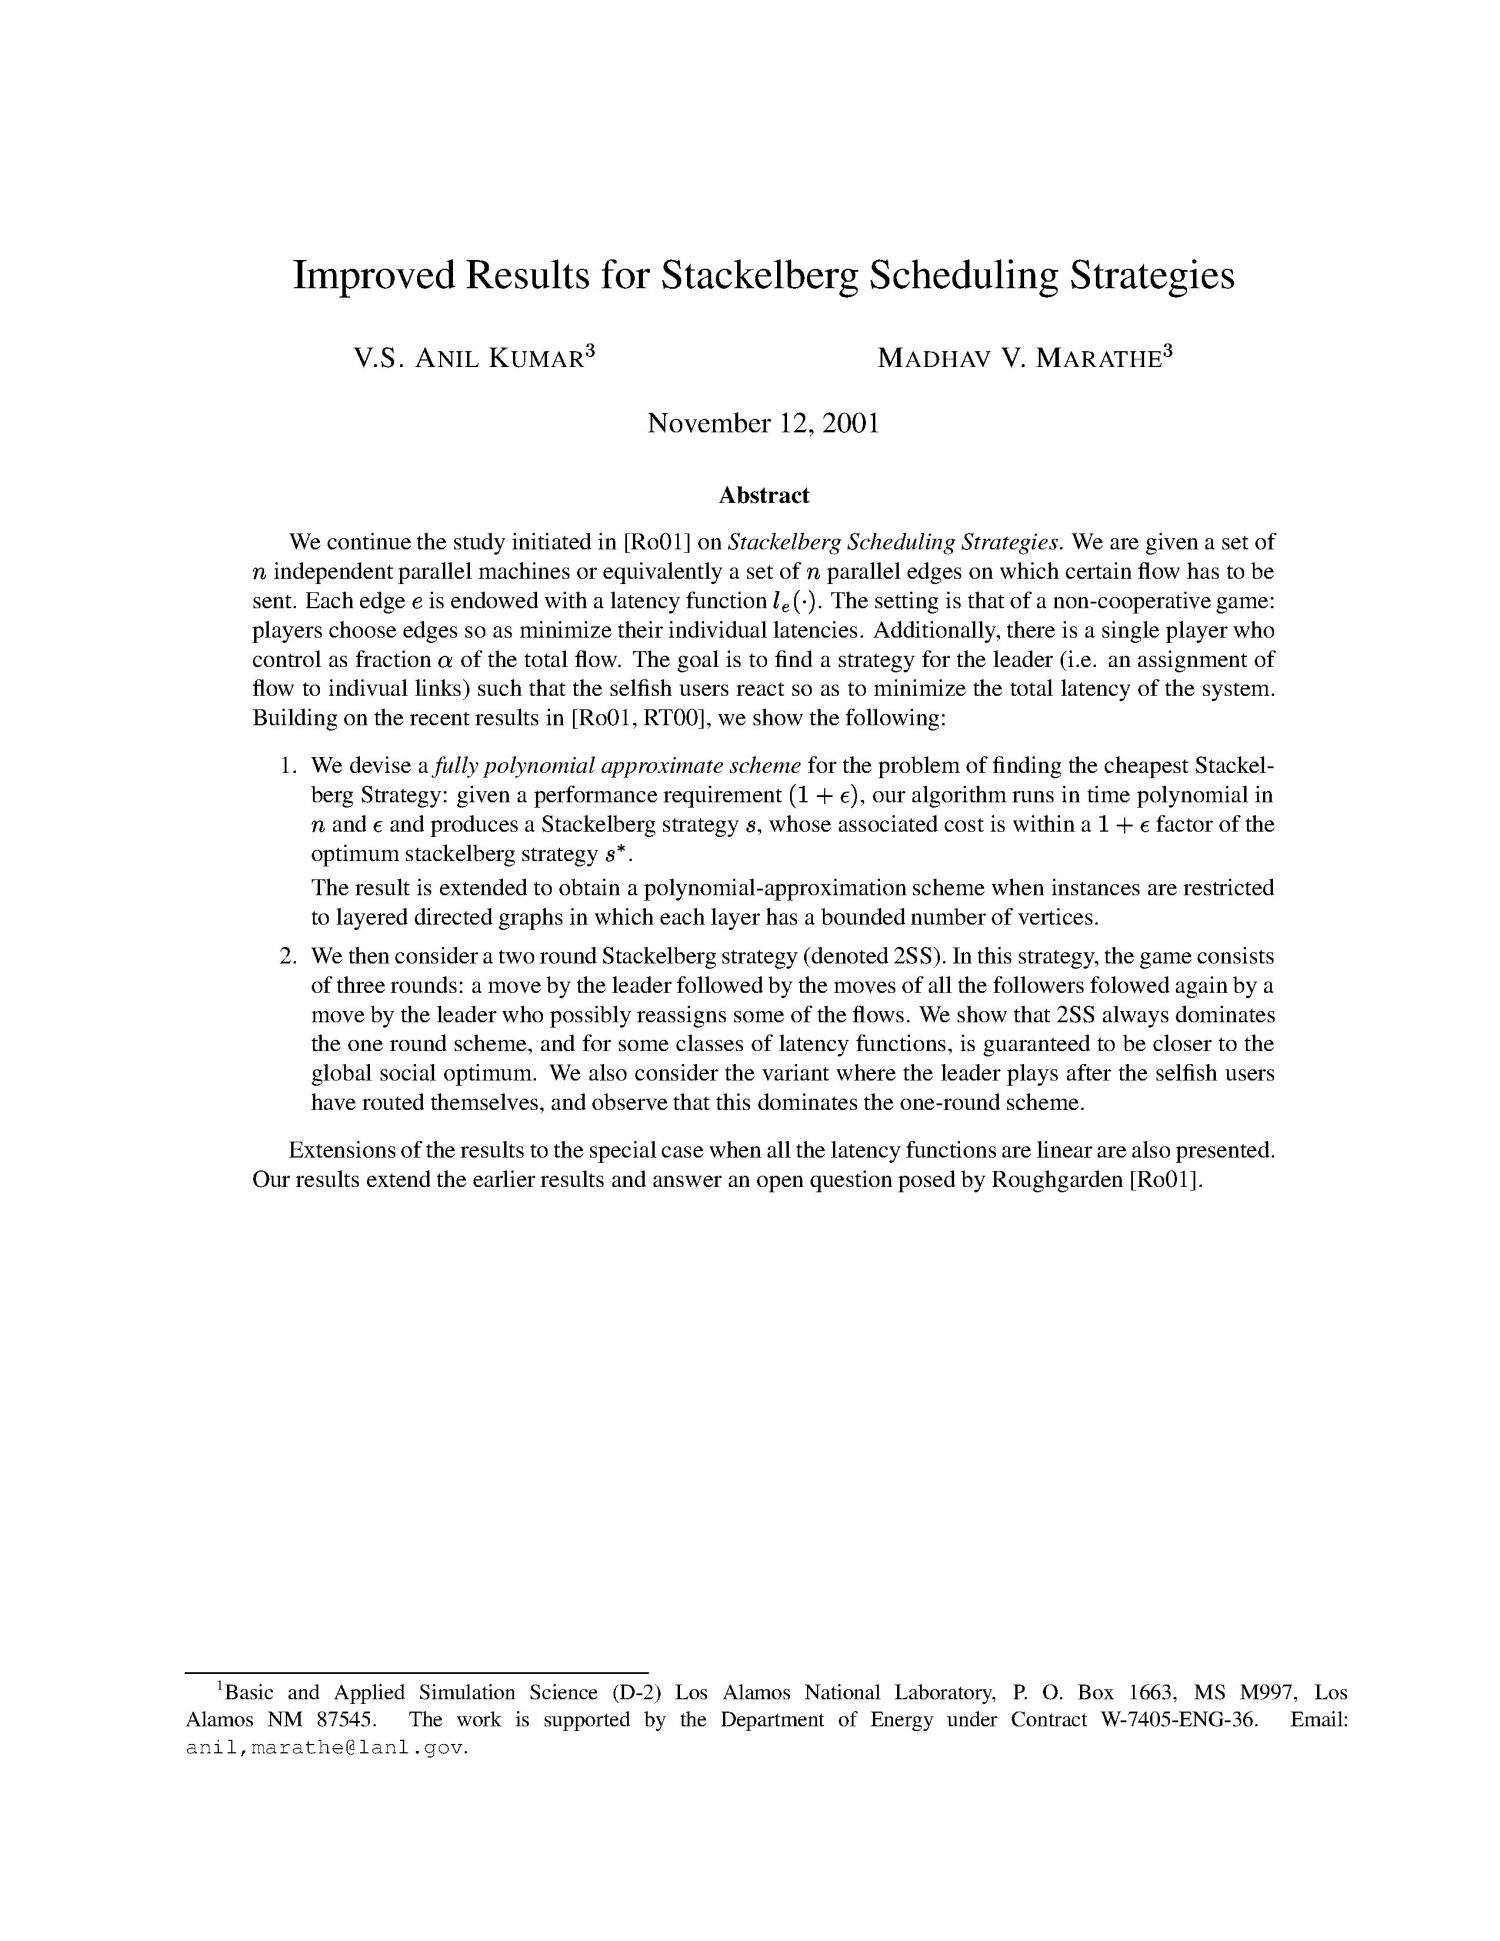 Improved Results for Stackelberg Scheduling Strategies.
                                                
                                                    [Sequence #]: 2 of 22
                                                